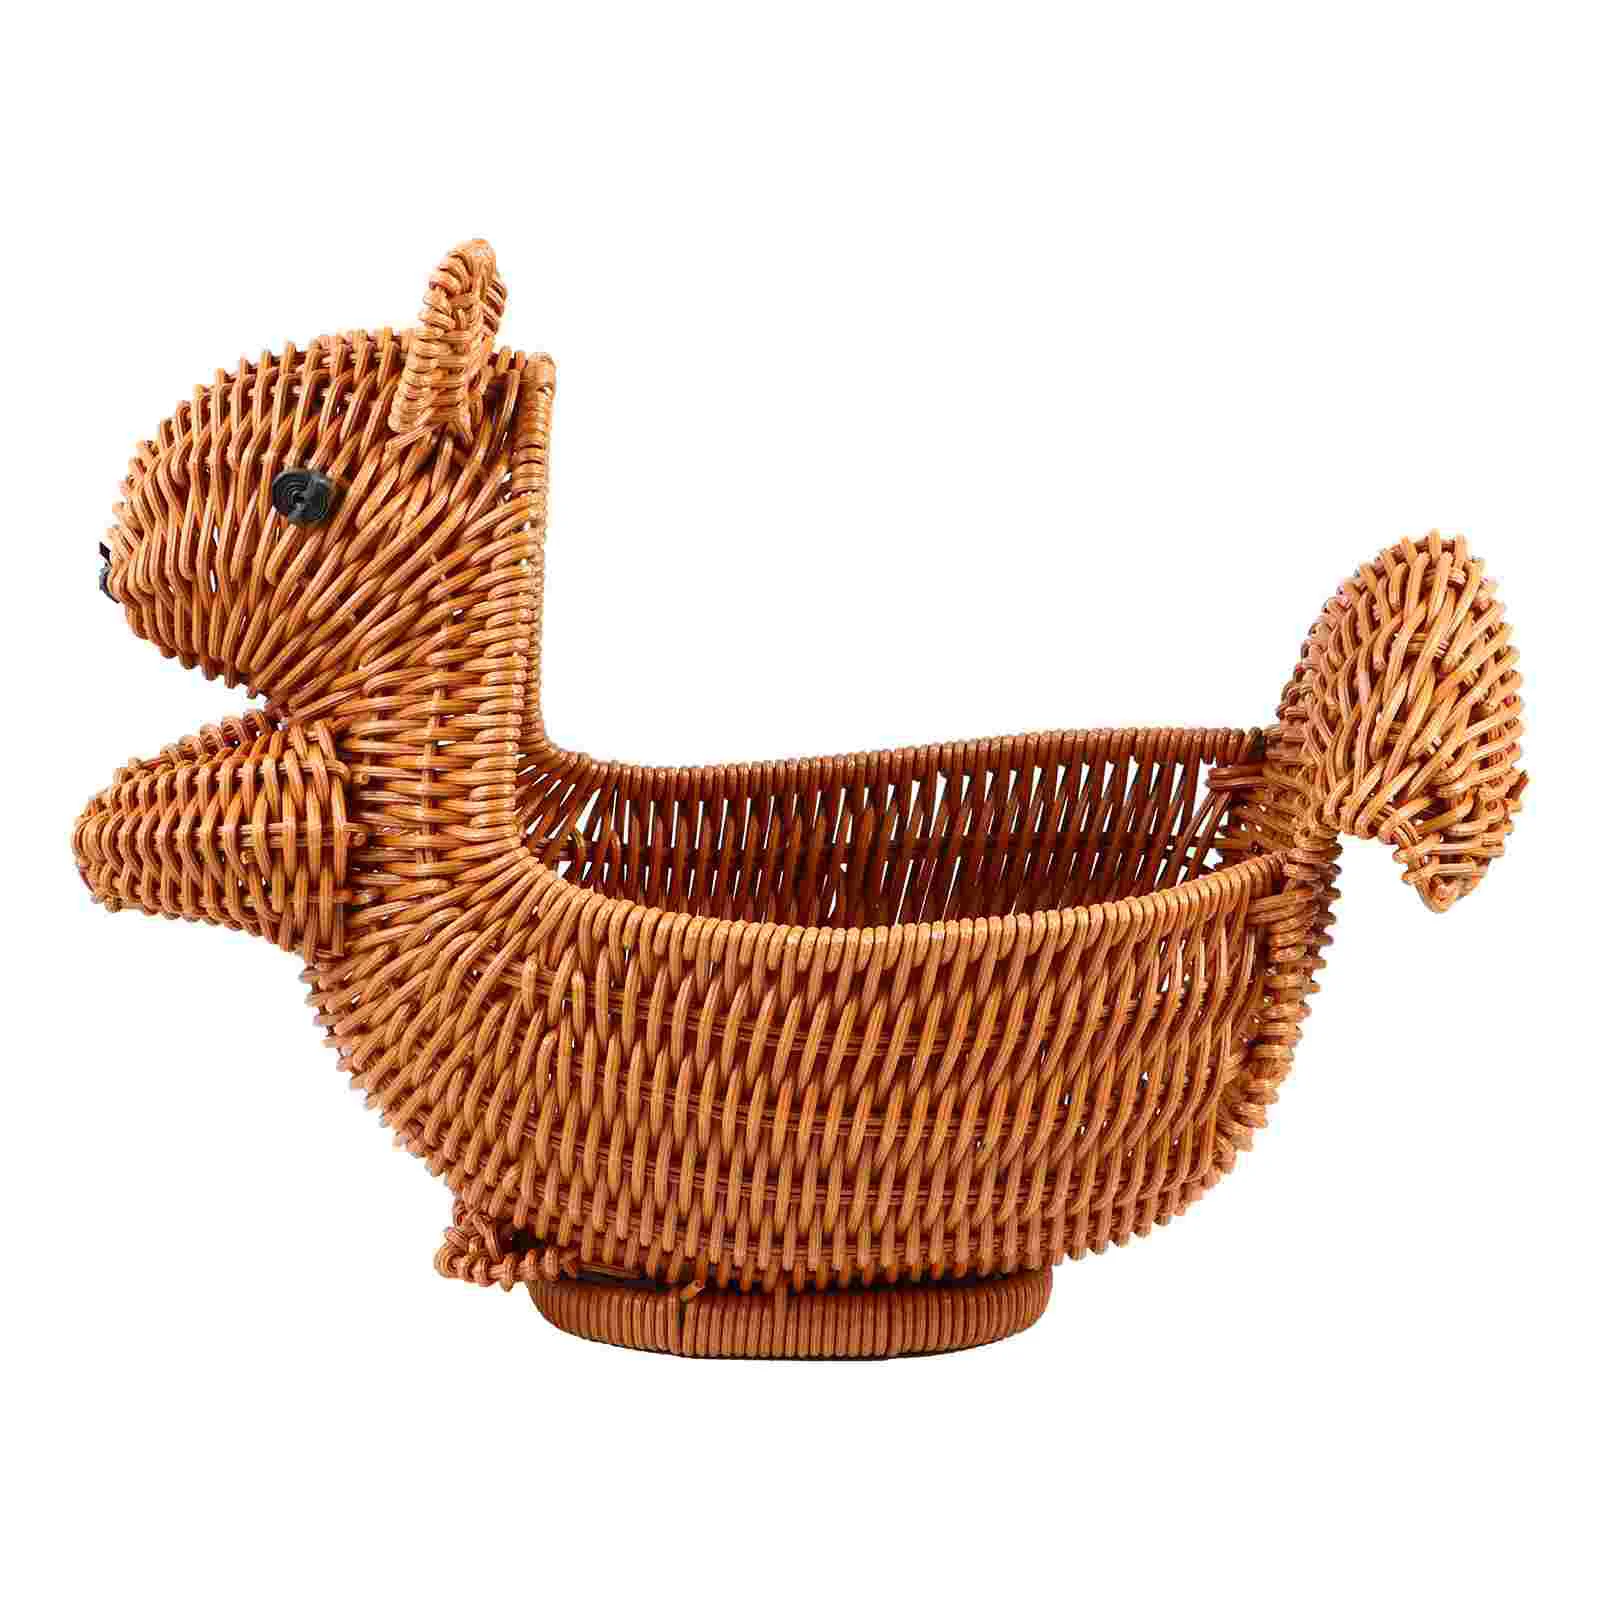 

Basket Fruit Woven Wicker Rattan Storage Bowl Serving Bread Tray Snackdecorative Baskets Squirrel Weaving Candy Weave Bowls